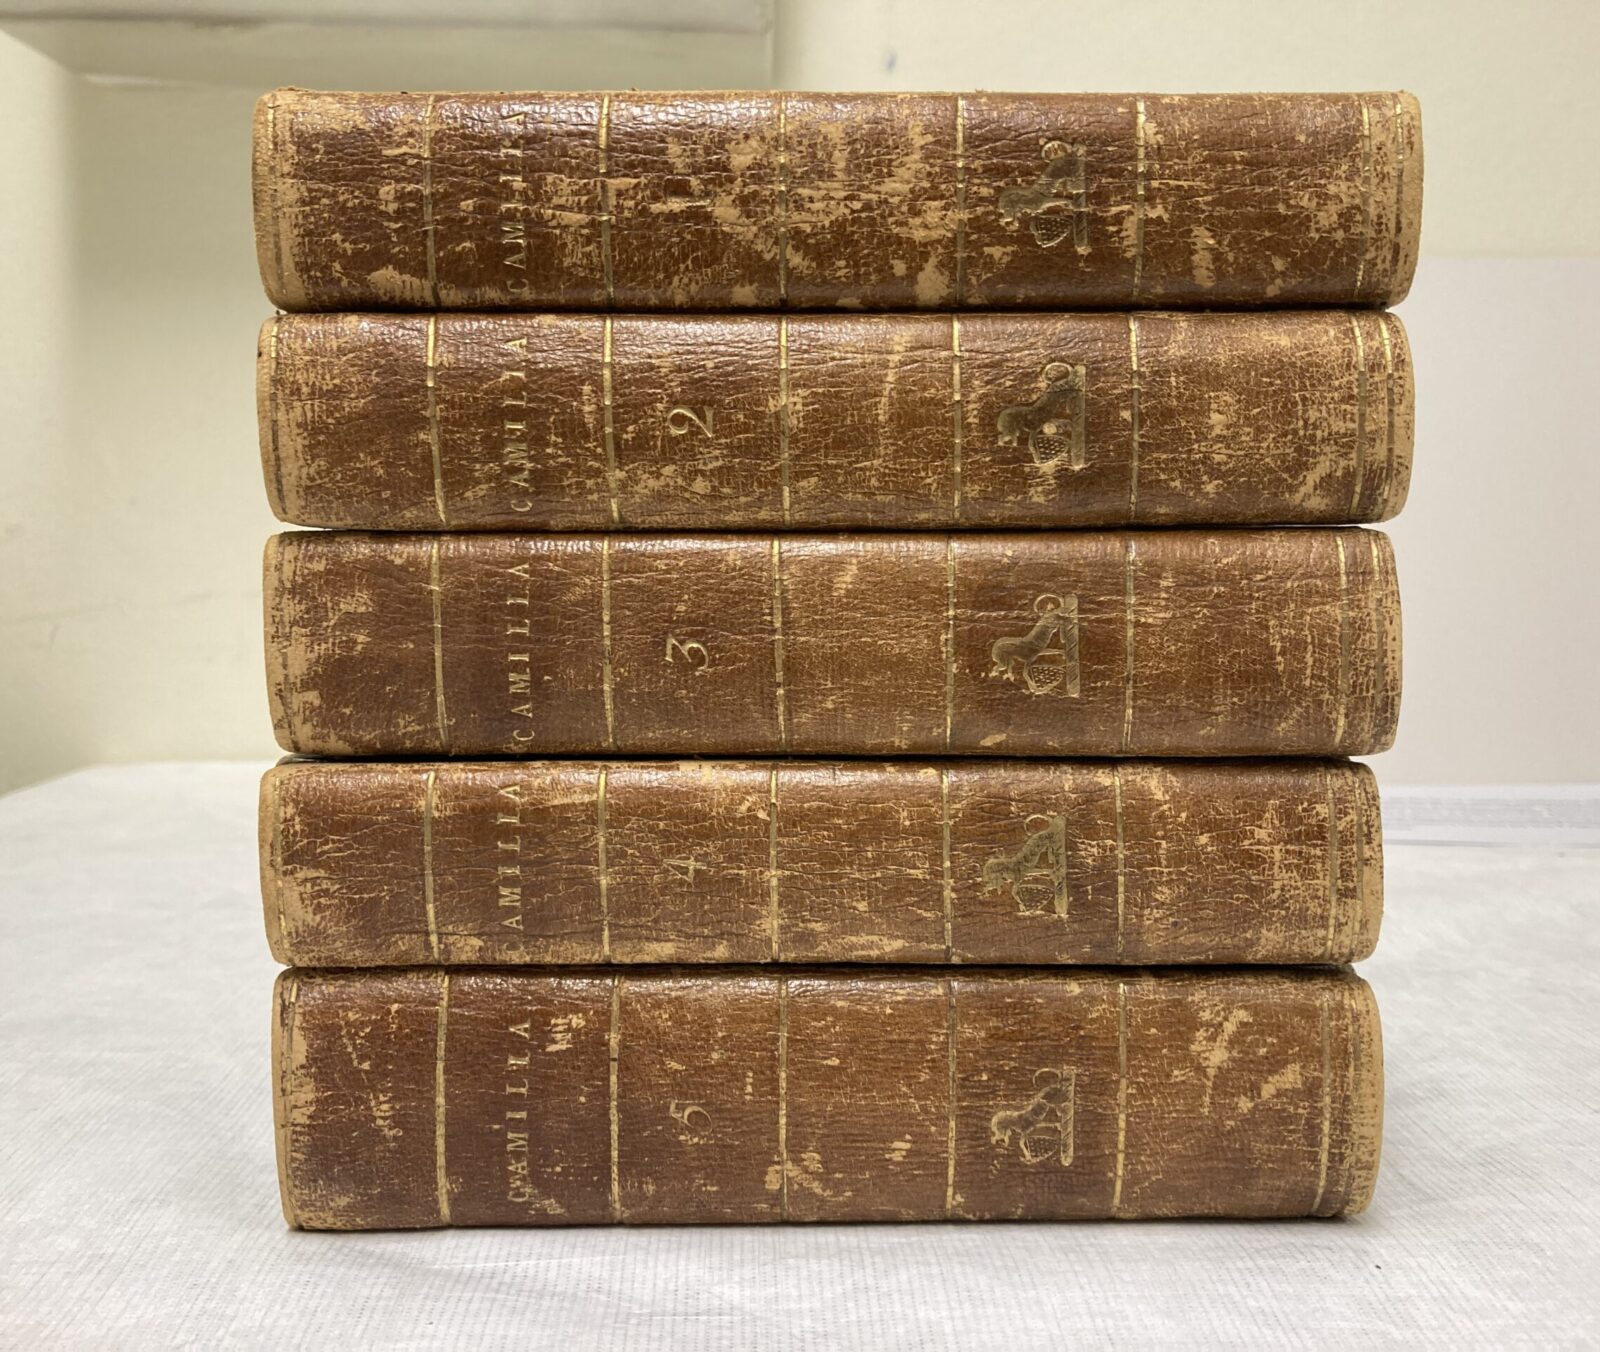 Camilla, or, a Picture of Youth, by Fanny Burney, in five volumes. First edition, 1796.